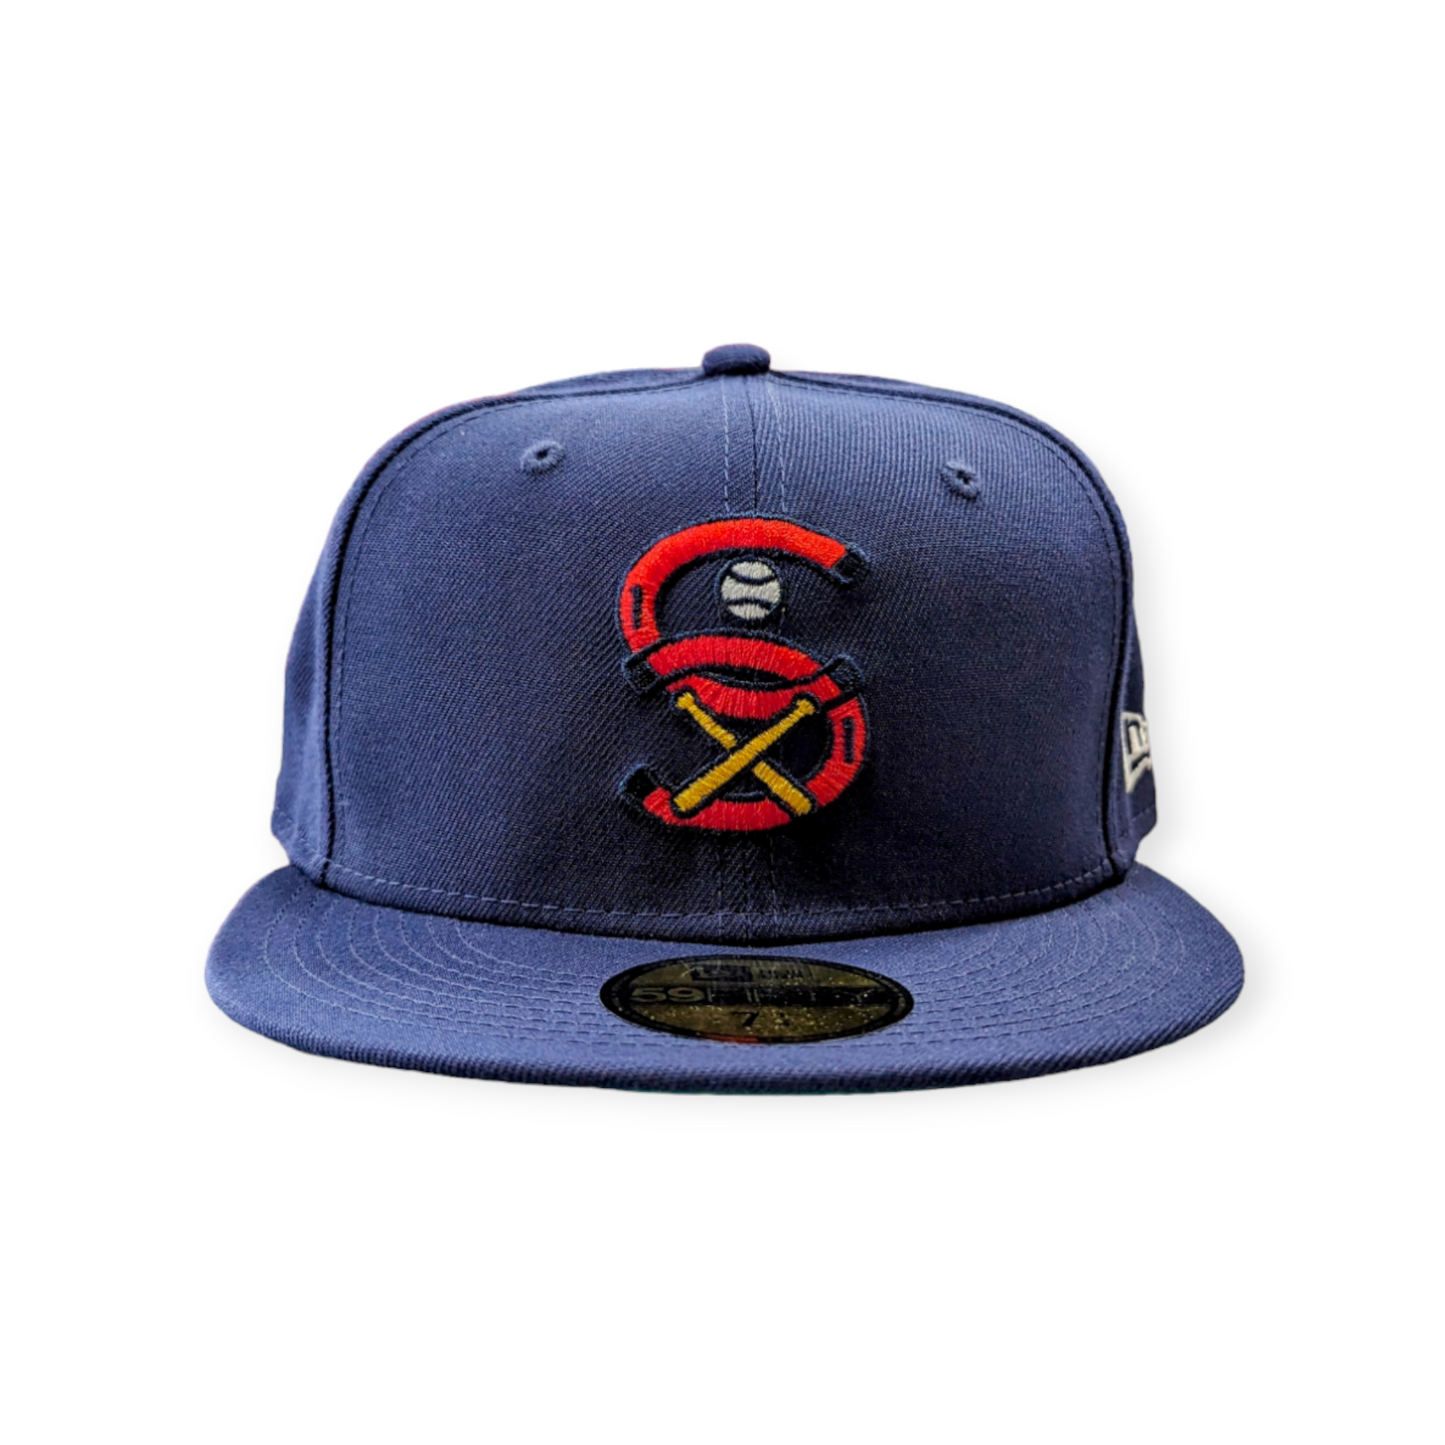 Chicago White Sox 1932 Alternate New Era Cooperstown Classics Navy 59FIFTY Fitted Hat